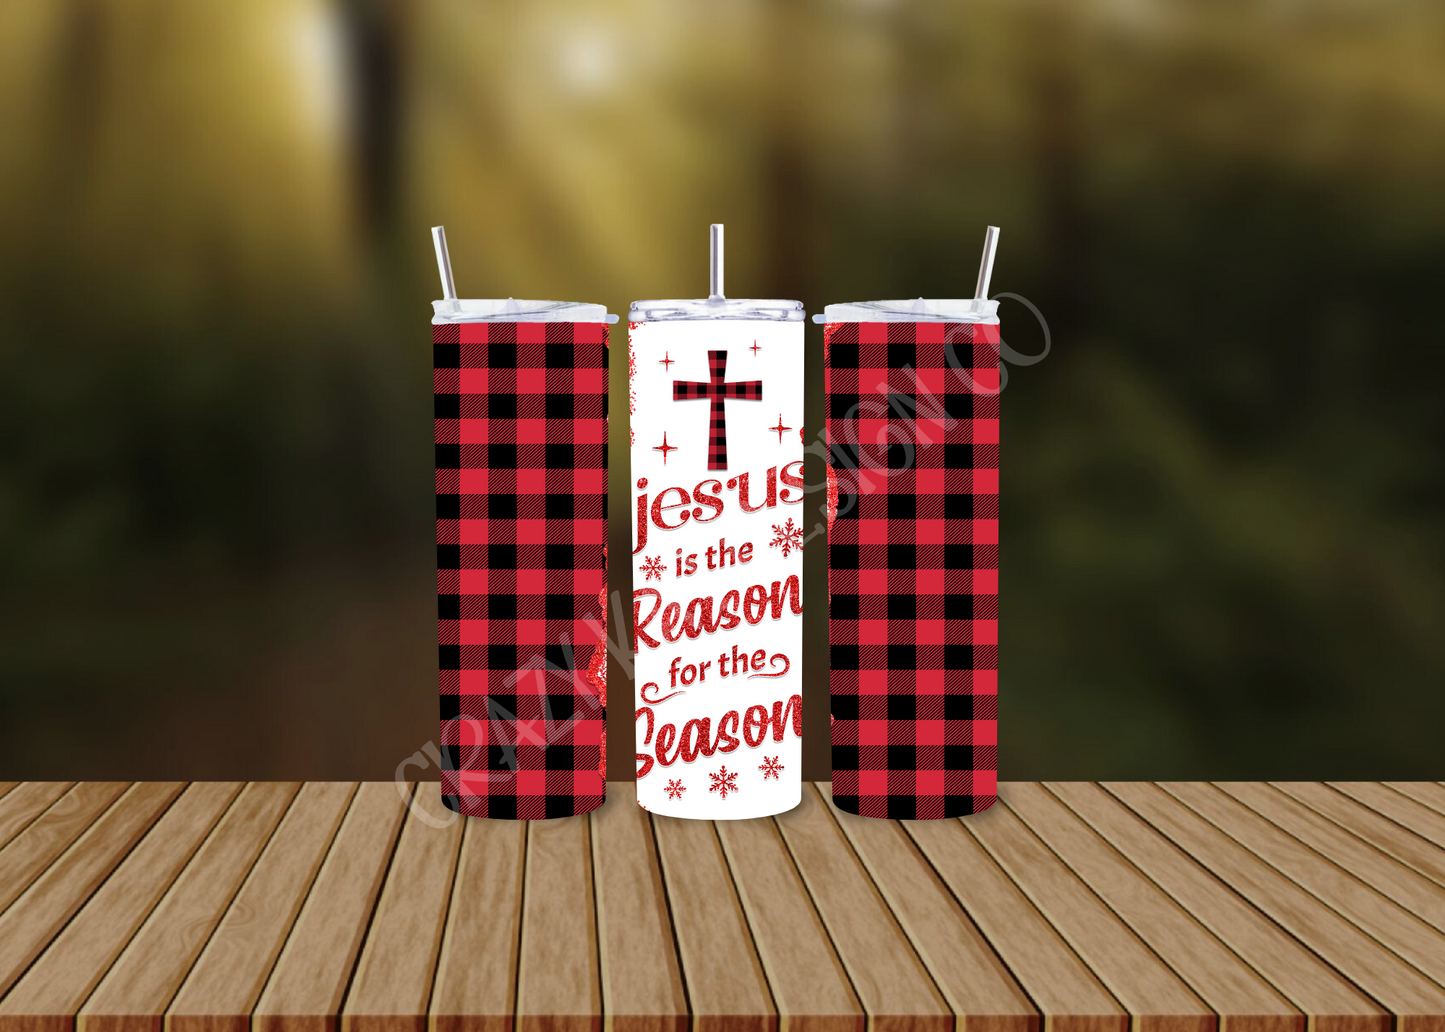 CUSTOMIZABLE JESUS IS THE REASON FOR THE SEASON HOT AND COLD TUMBLERS